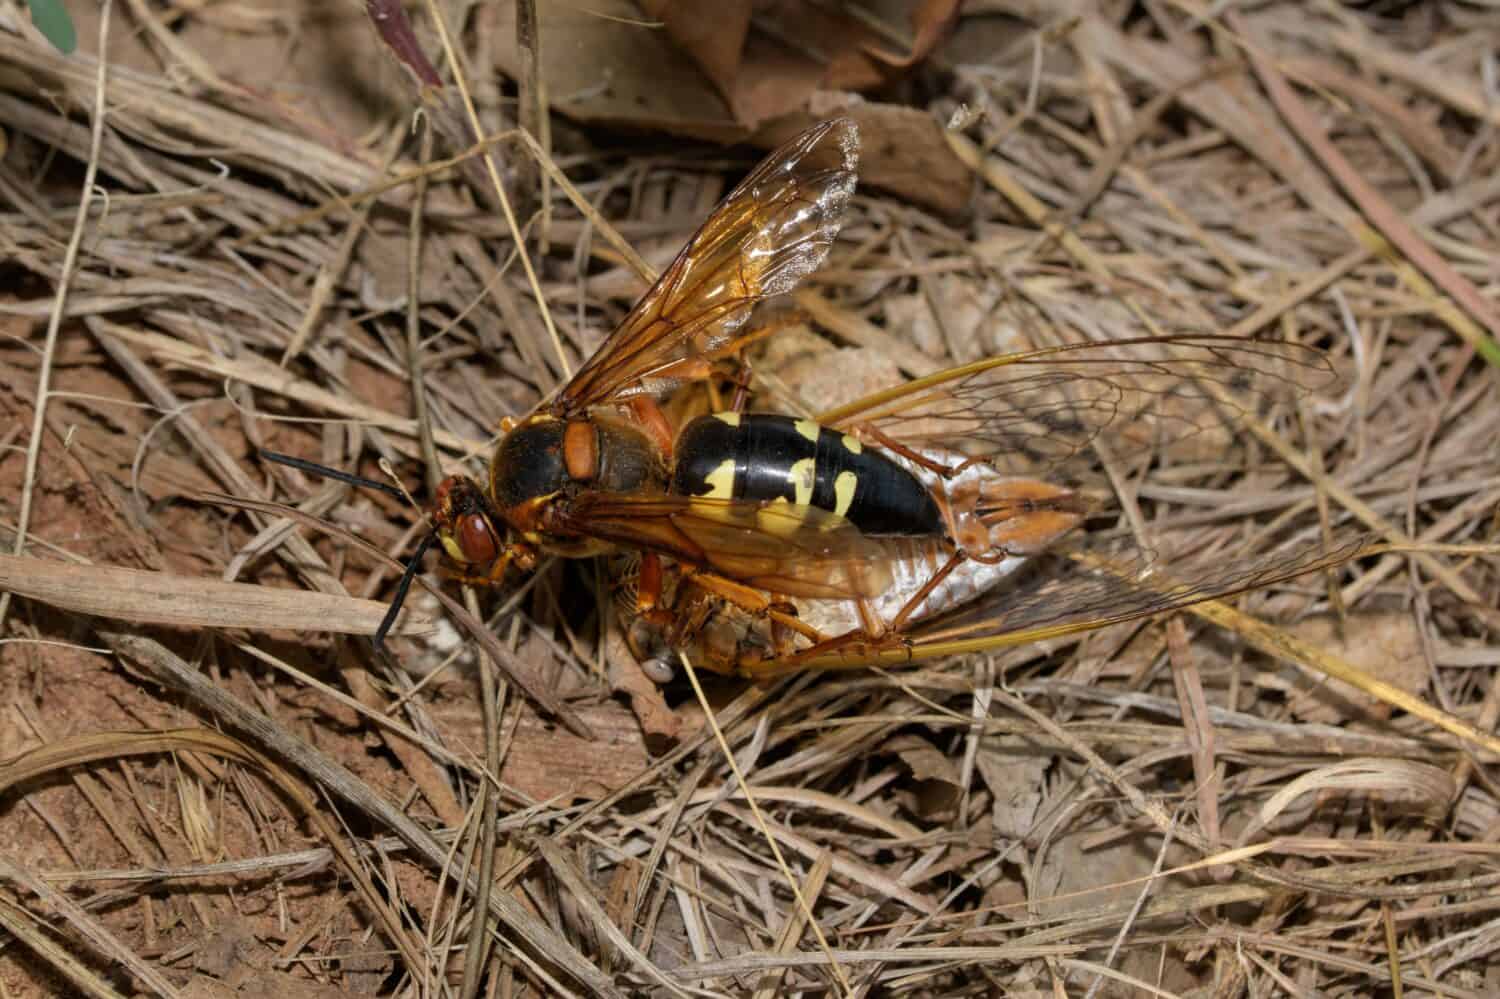 Top view of an Eastern Cicada Killer wasp dragging a Cicada on the ground